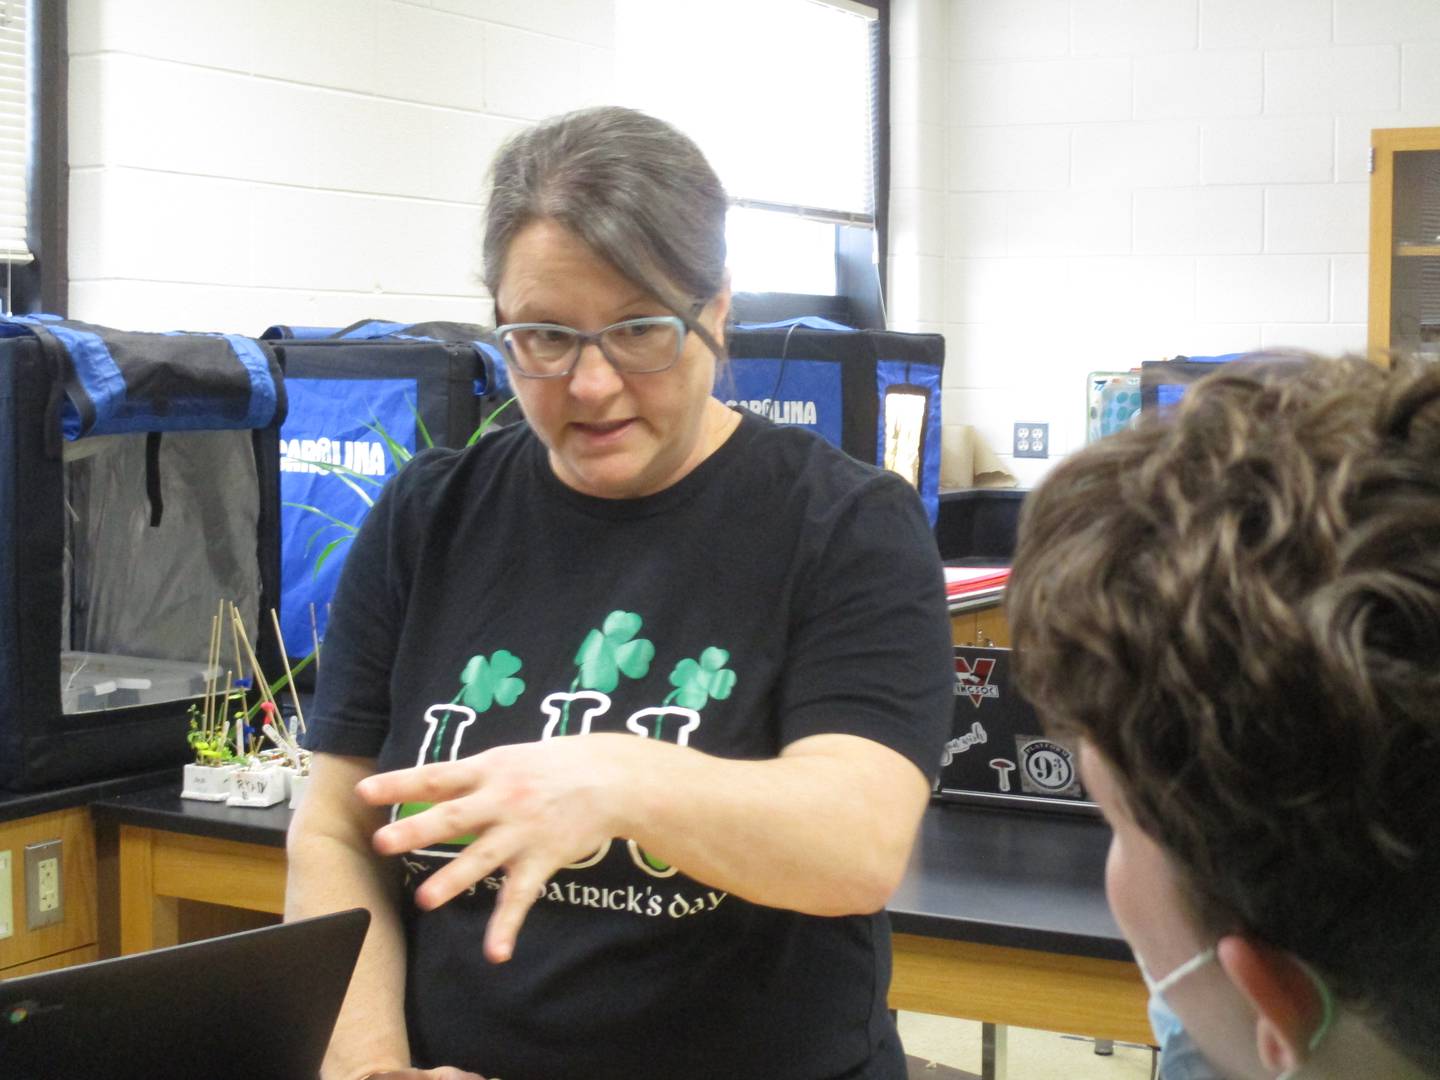 Oswego High School biology teacher Pam Phelps explains a concept to a student during a lab session. (Mark Foster -- mfoster@shawmedia.com)